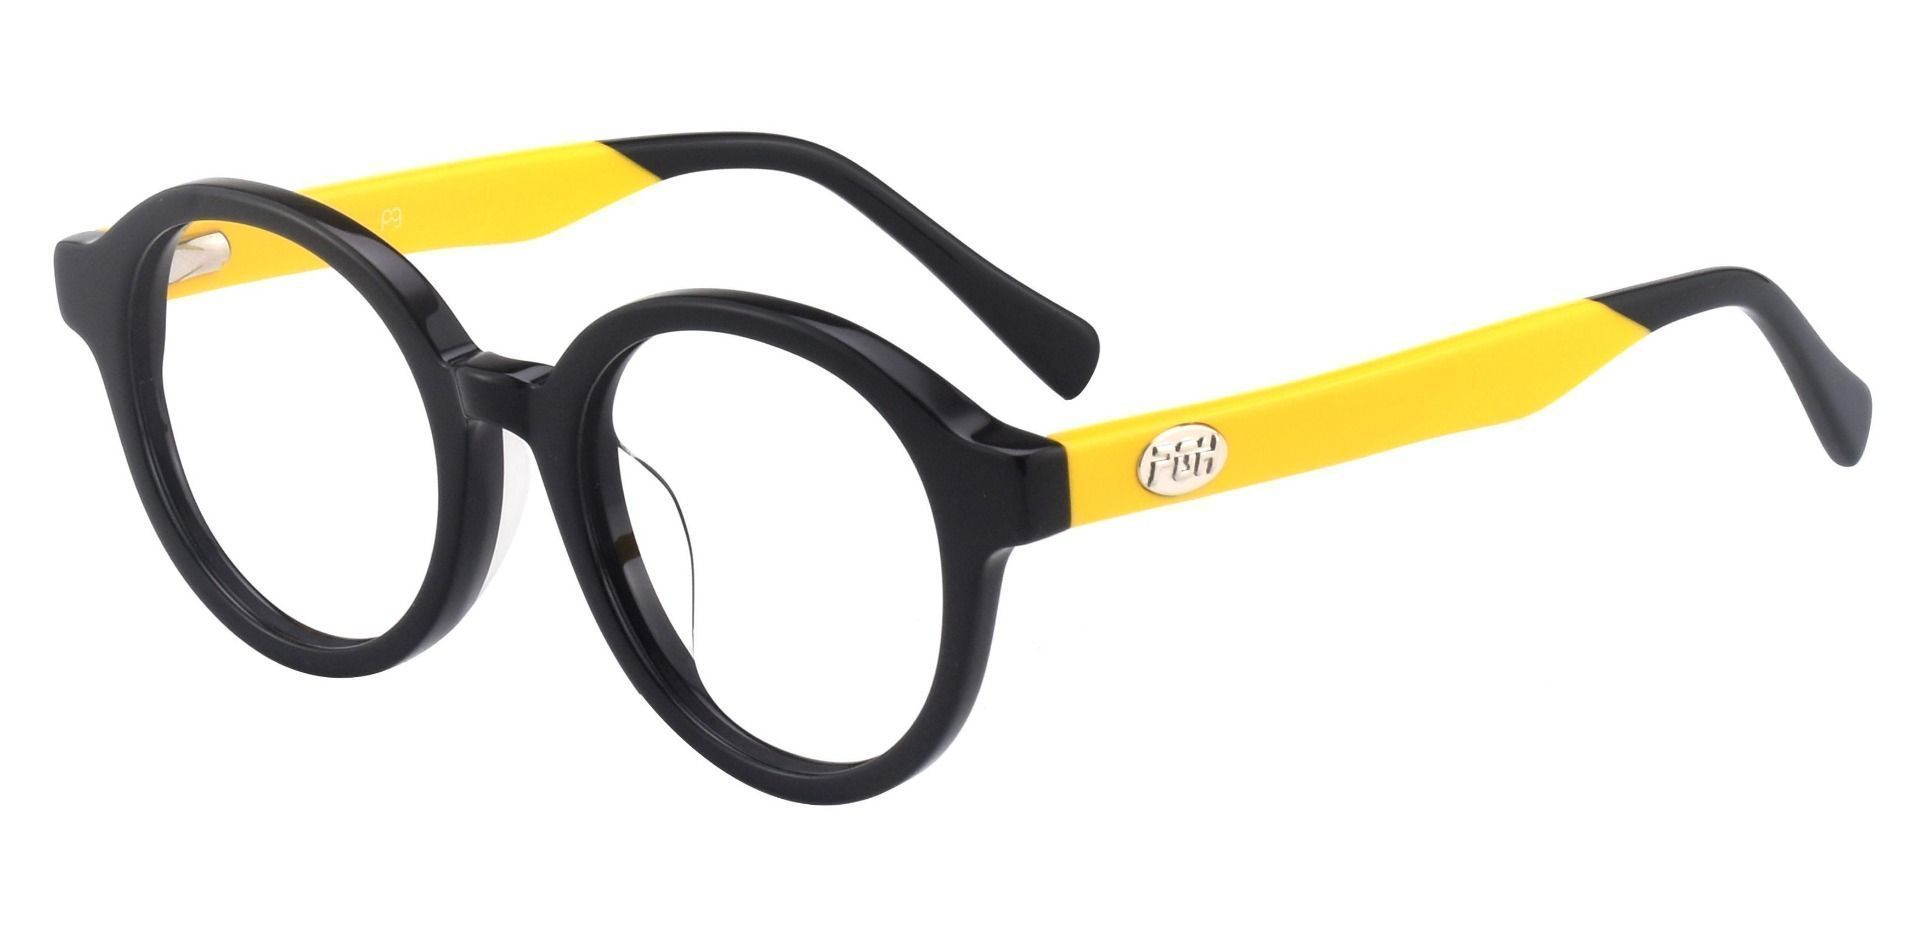 Champ Round Blue Light Blocking Glasses - The Frame Is Black And Gold